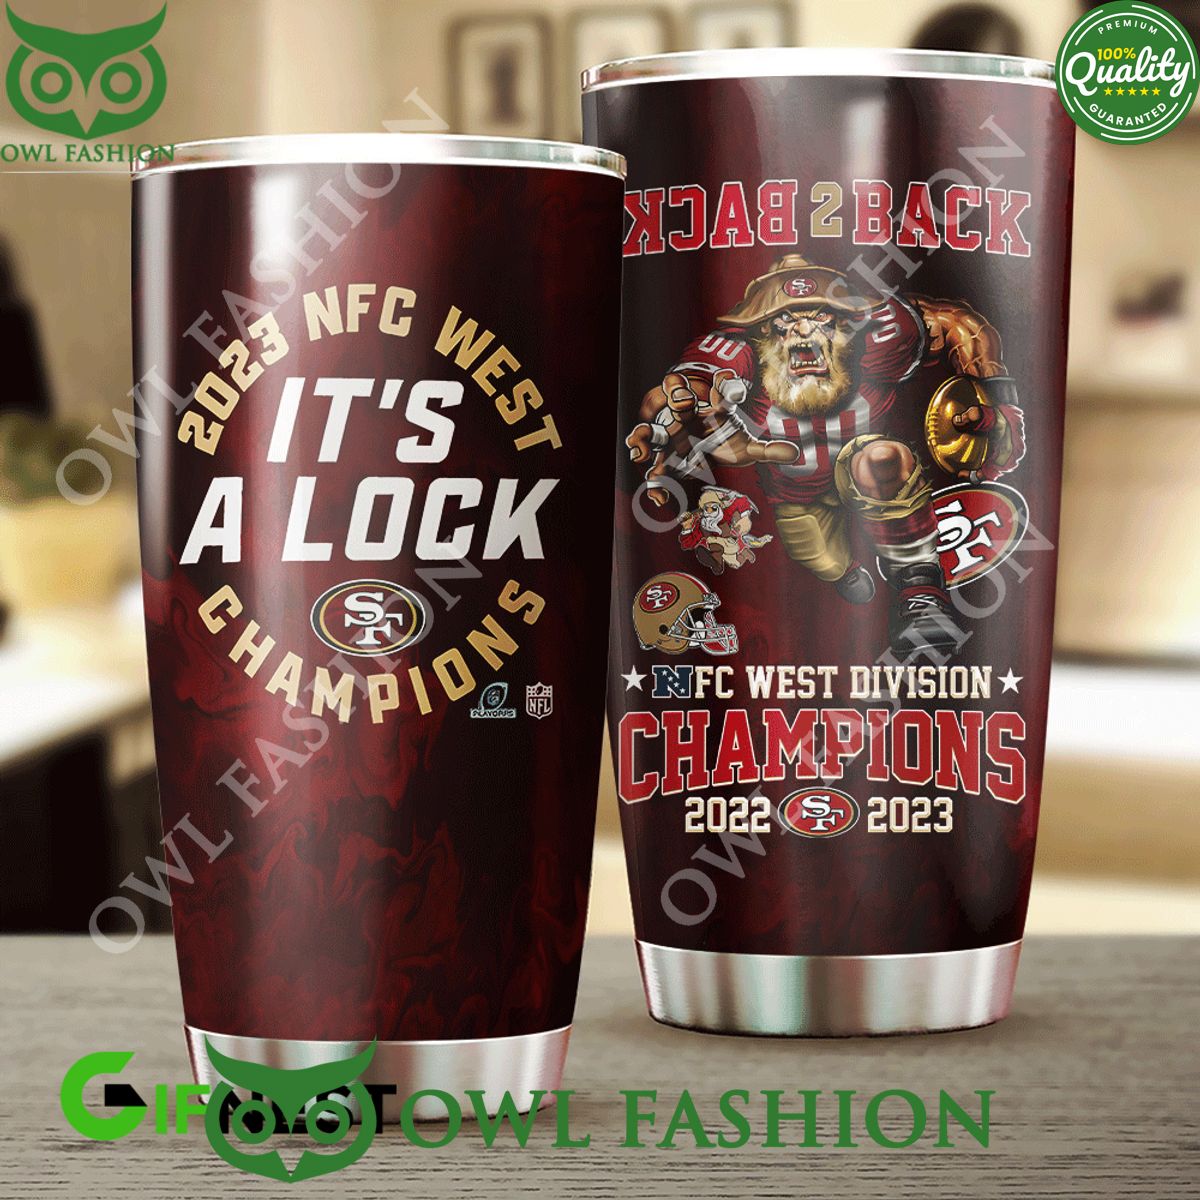 Back to Back San Francisco NFC Tumbler Cup Nice bread, I like it